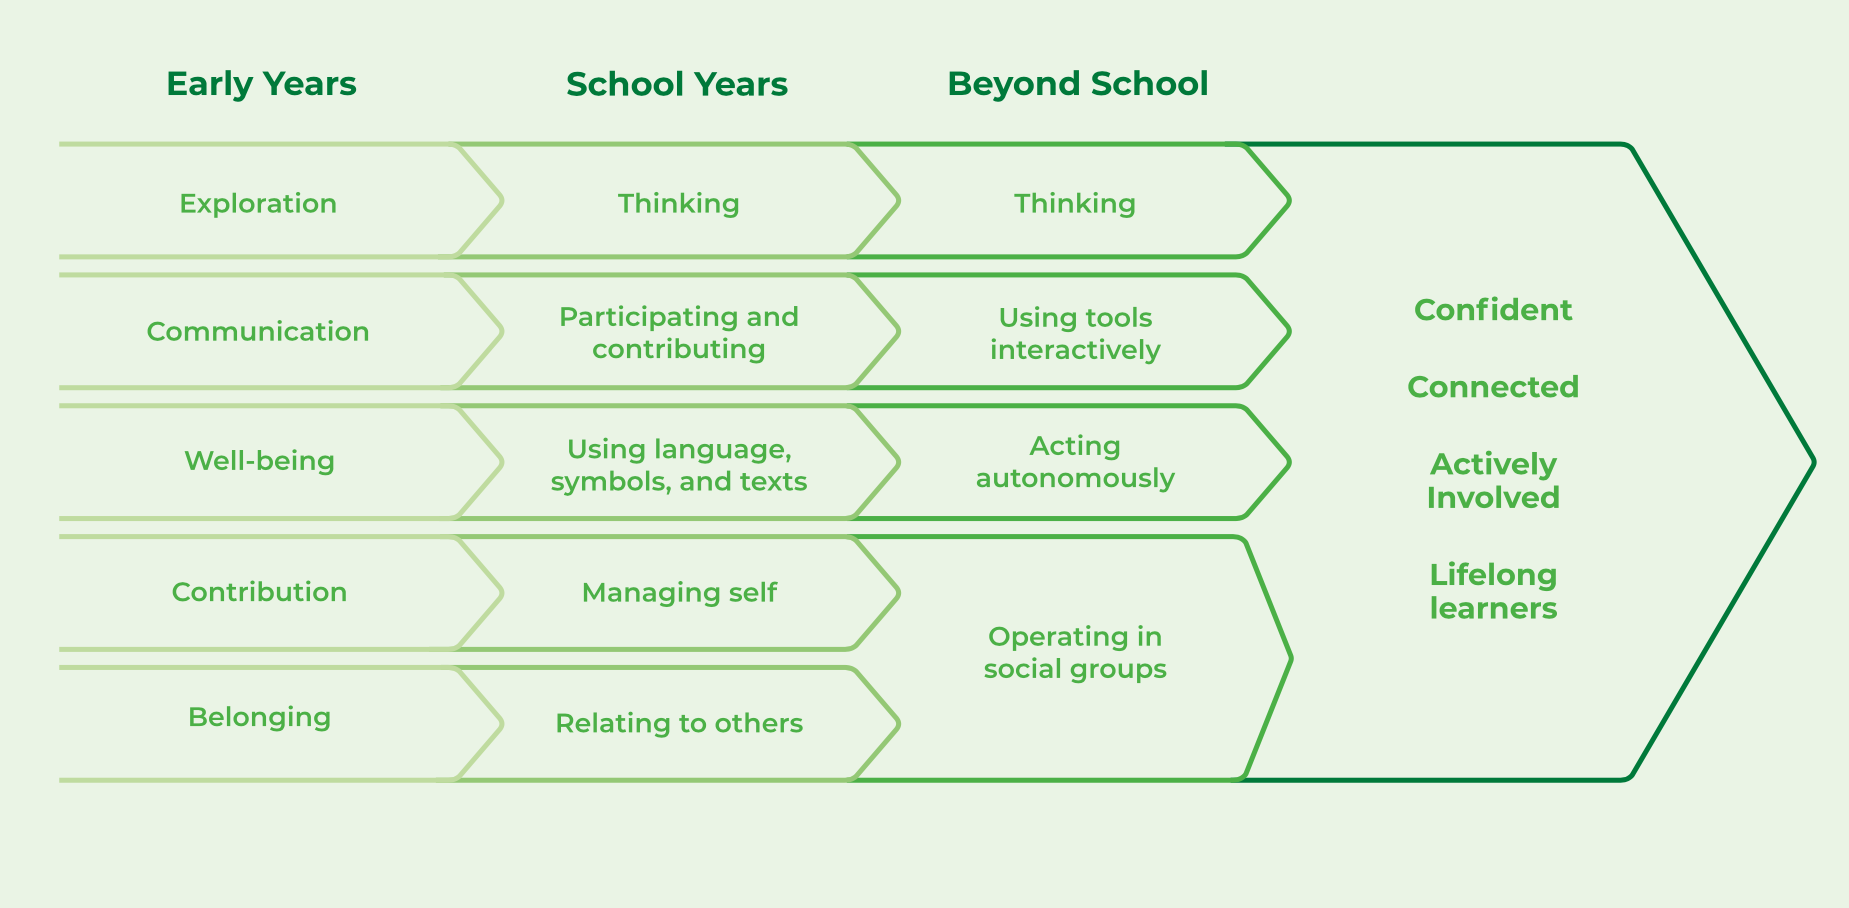 A diagram showing early years learning dispositions of exploration, communication, wellbeing, contribution and belonging, leading into school key competencies of thinking, participating and contributing, using language, symbols, and tools, managing self and relating to others. Beyond school these lead to thinking, using tools interactively, acting autonomously, and operating in social groups. All these lead to confident, connected, actively involved, lifelong learners.